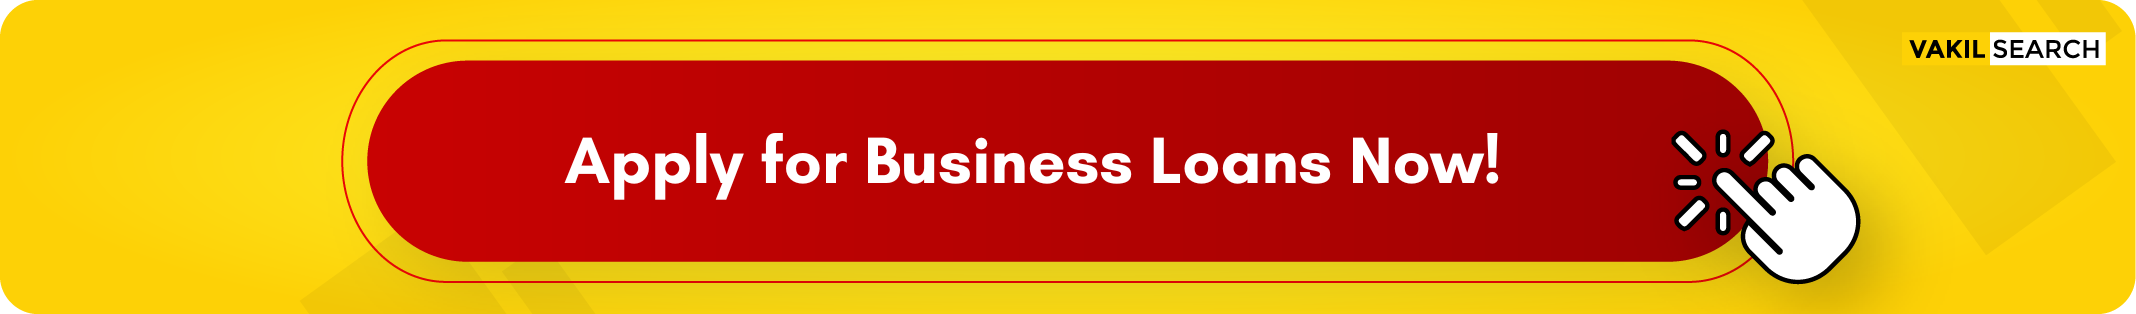 Apply for Business Loans!